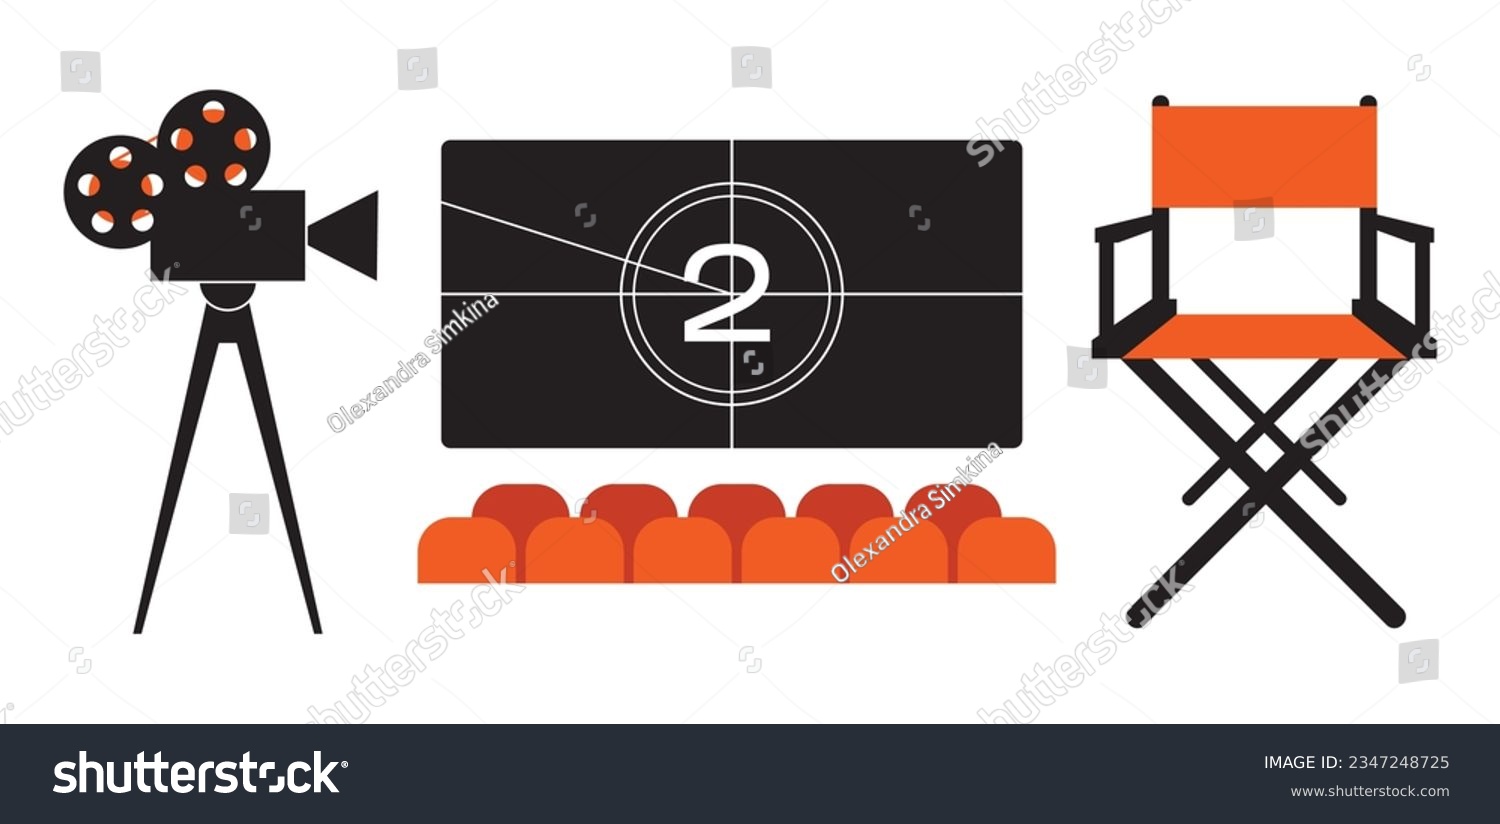 Cinema elements set. Video camera, director chair, cinema screen. Vector illustration for cinema theater, film, show, movie making concept. Flat vector illustration isolated on background #2347248725